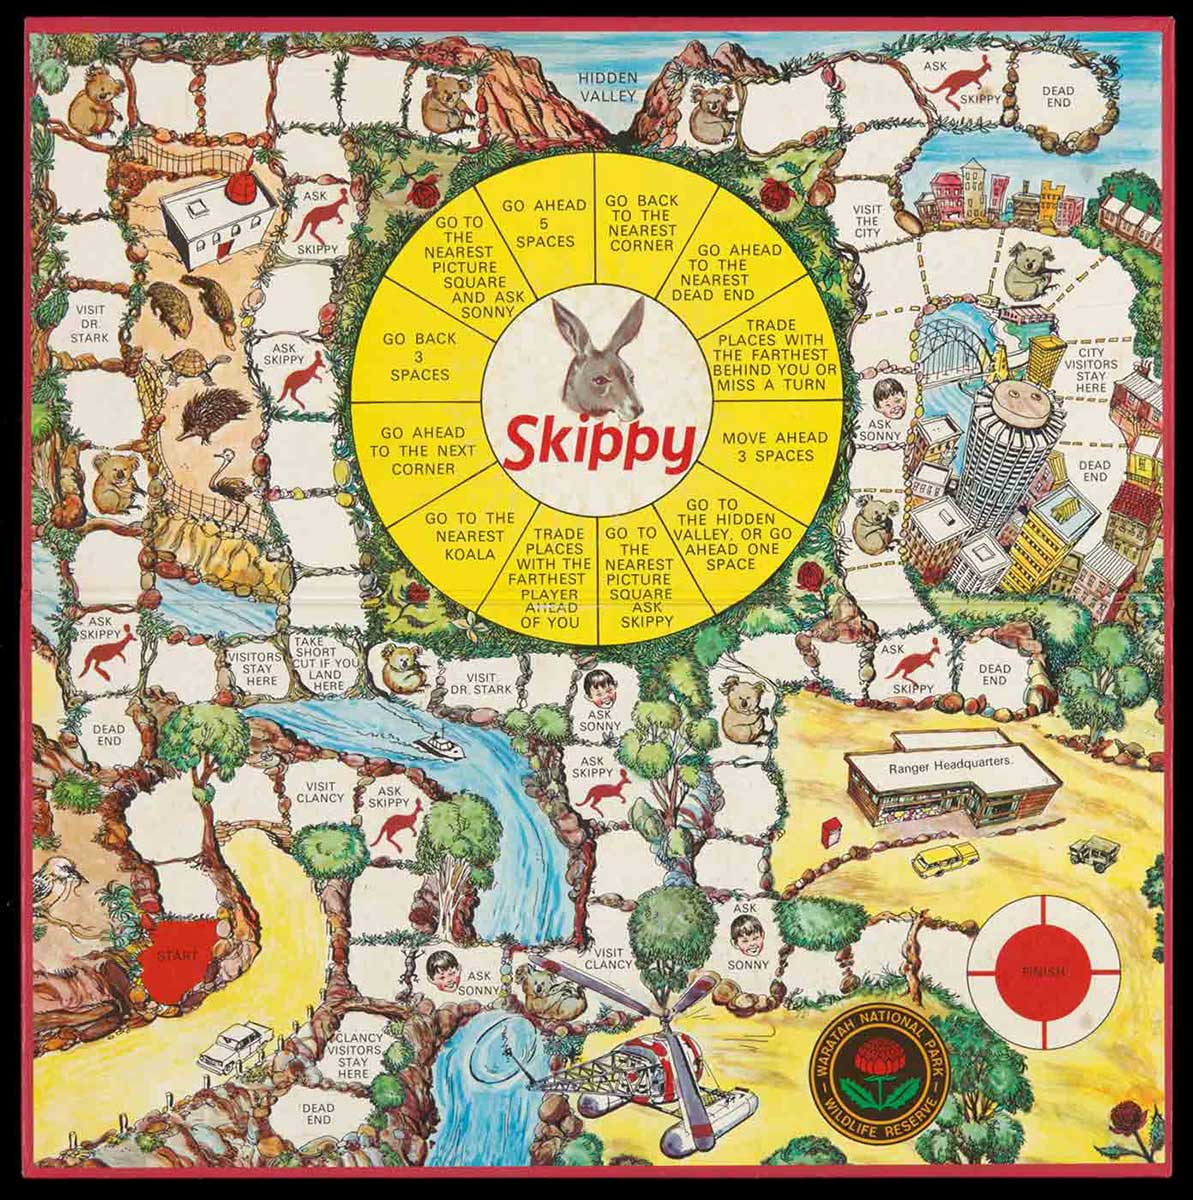 'Skippy' board game with a central image of a kangaroo and game squares set in locations including Hidden Valley and Sydney. - click to view larger image